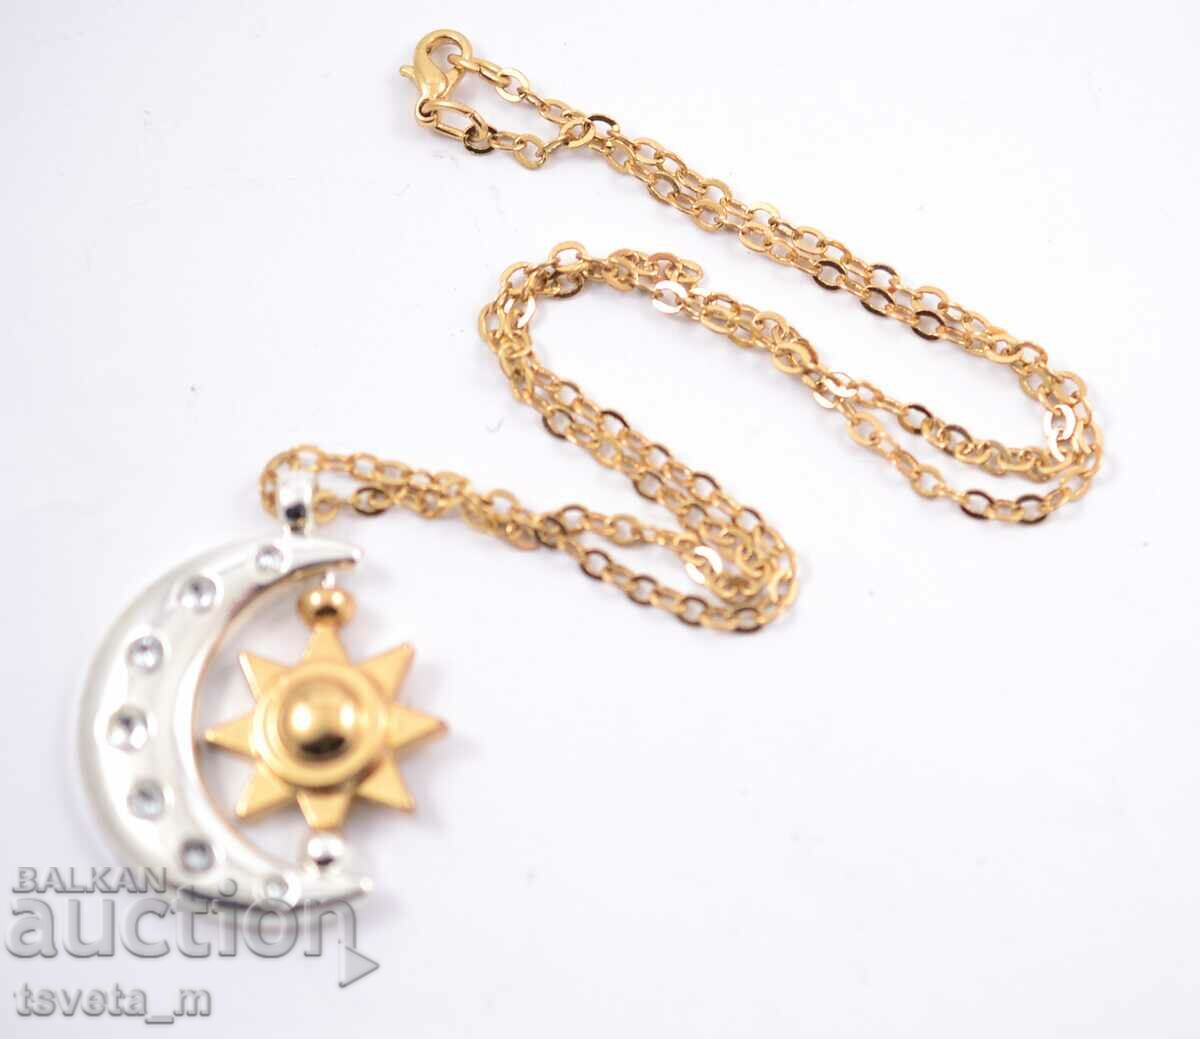 Chain with medallion, pendant, necklace